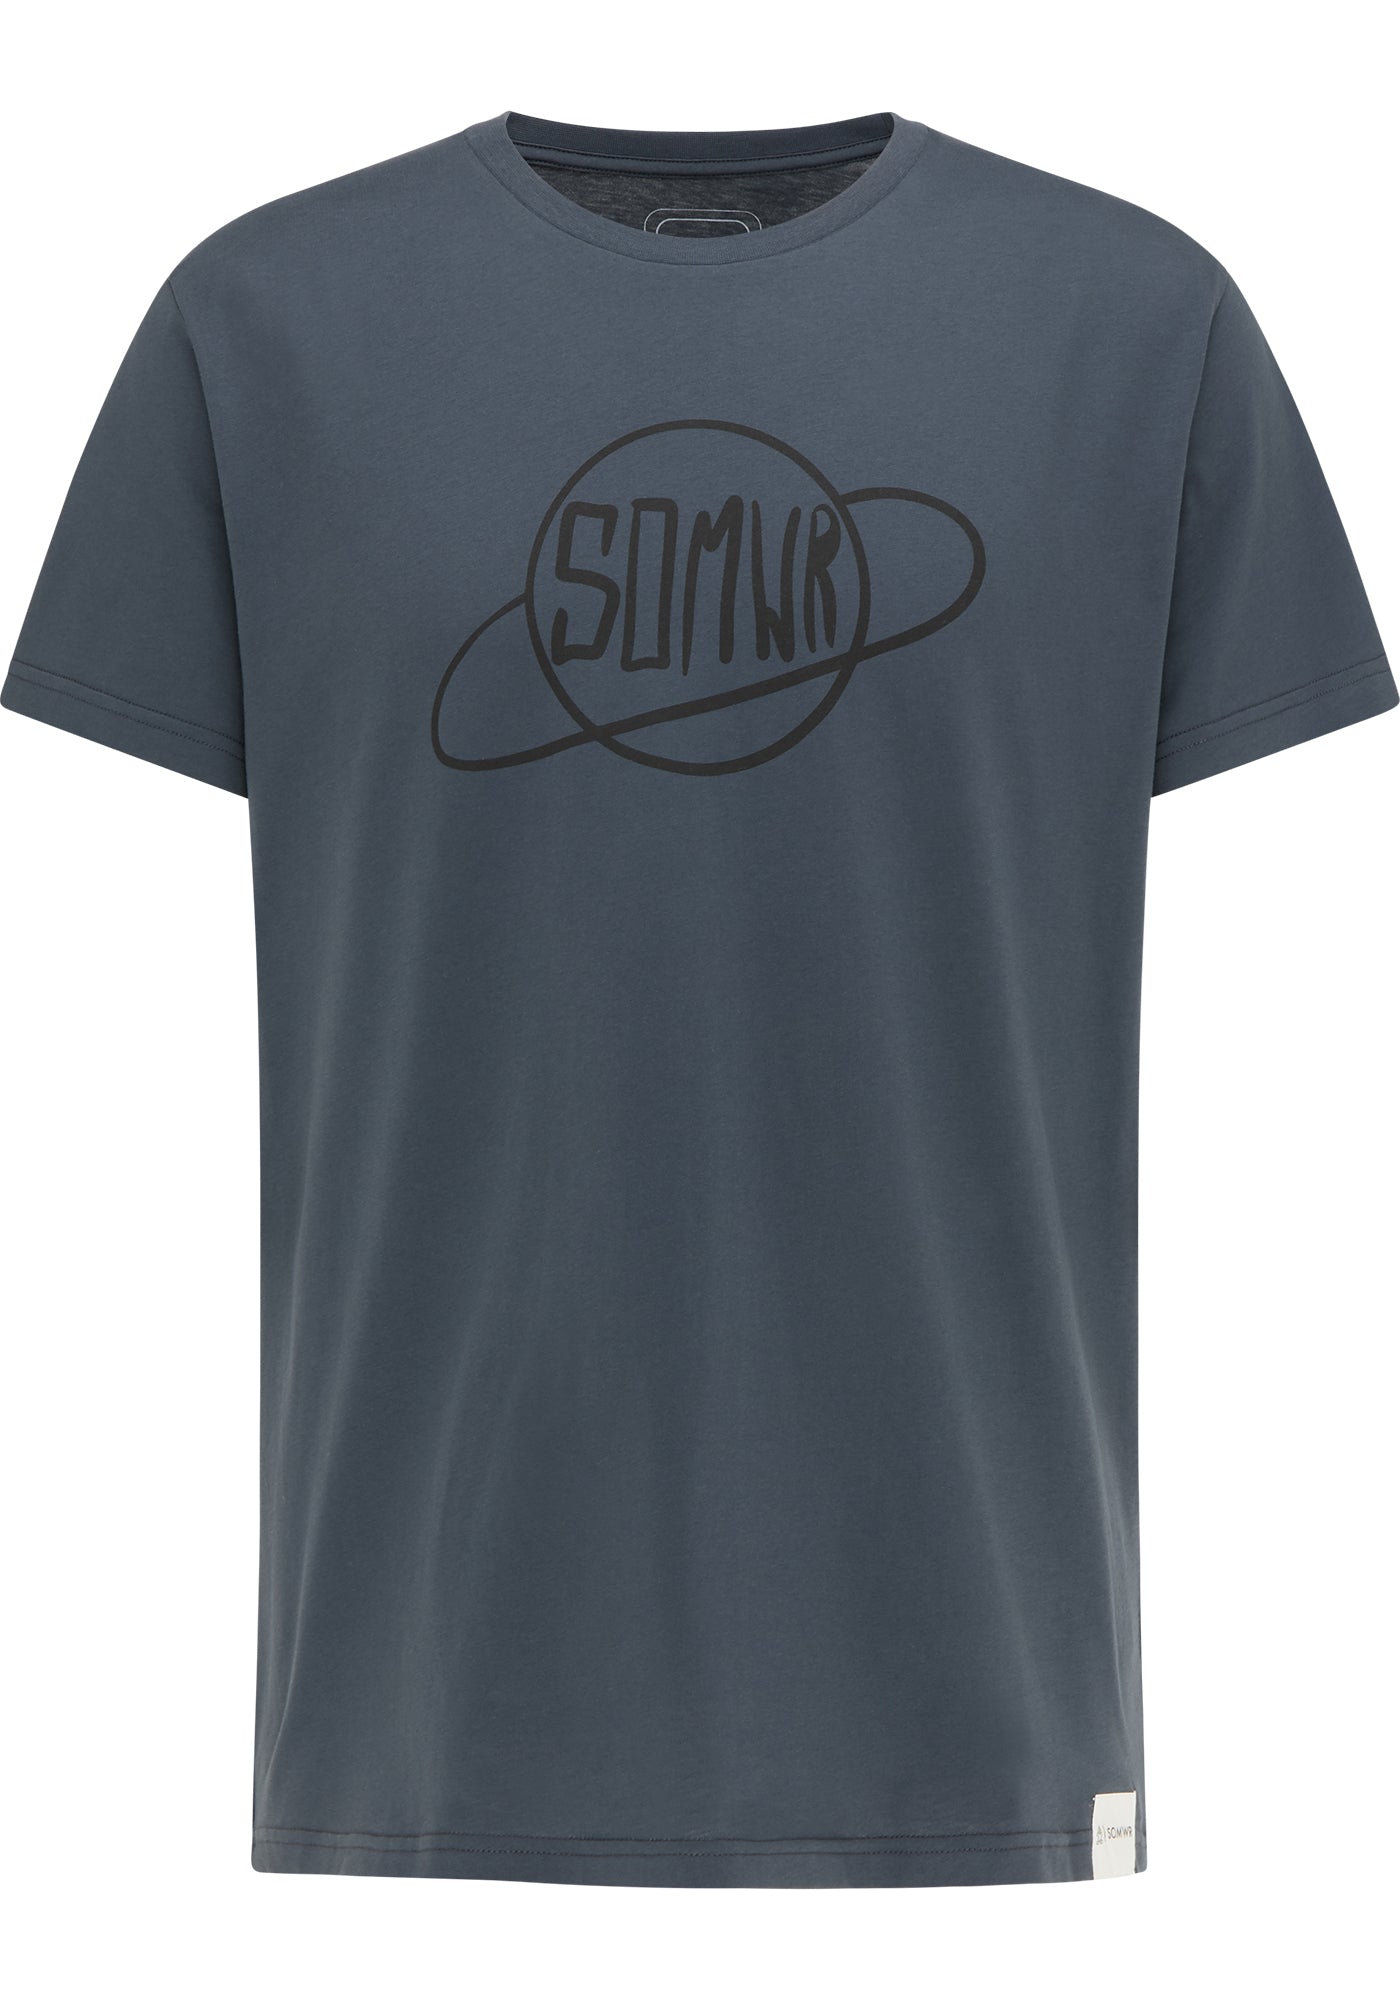 SOMWR PLANET SPHERE TEE T-Shirt NVY009